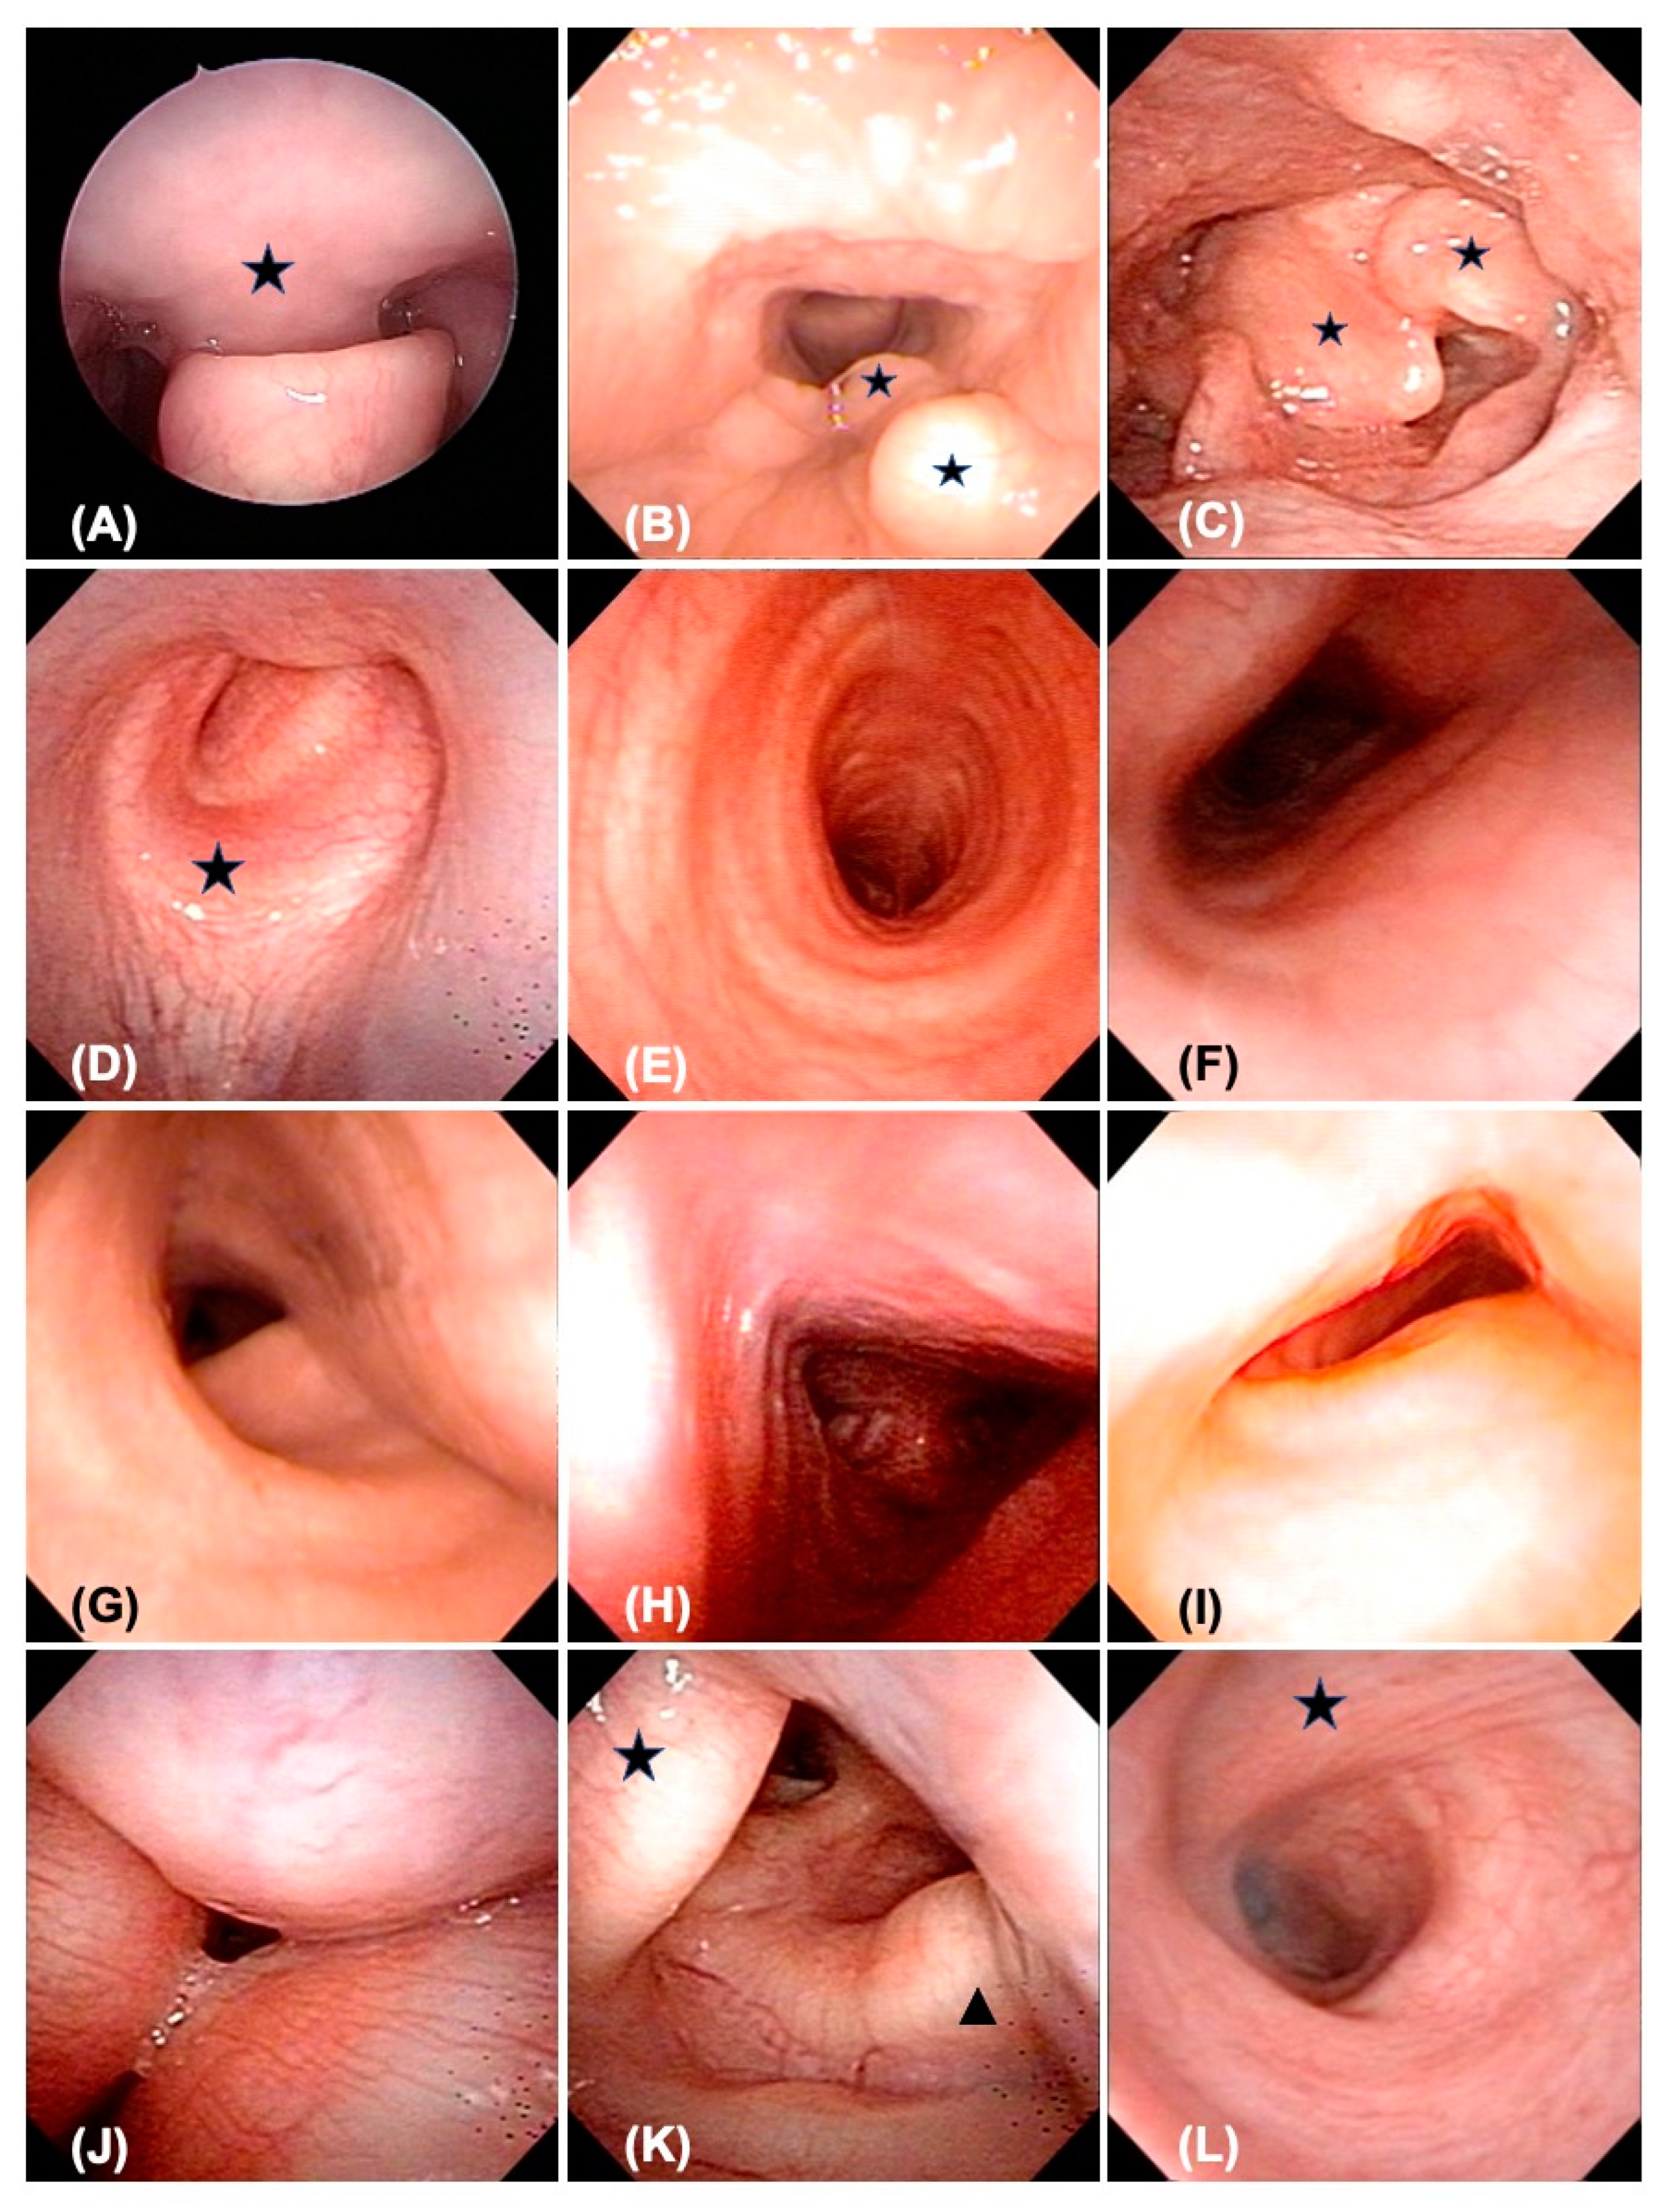 JPM | Free Full-Text | Endoscopic and Image Analysis of the Airway in  Patients with Mucopolysaccharidosis Type IVA